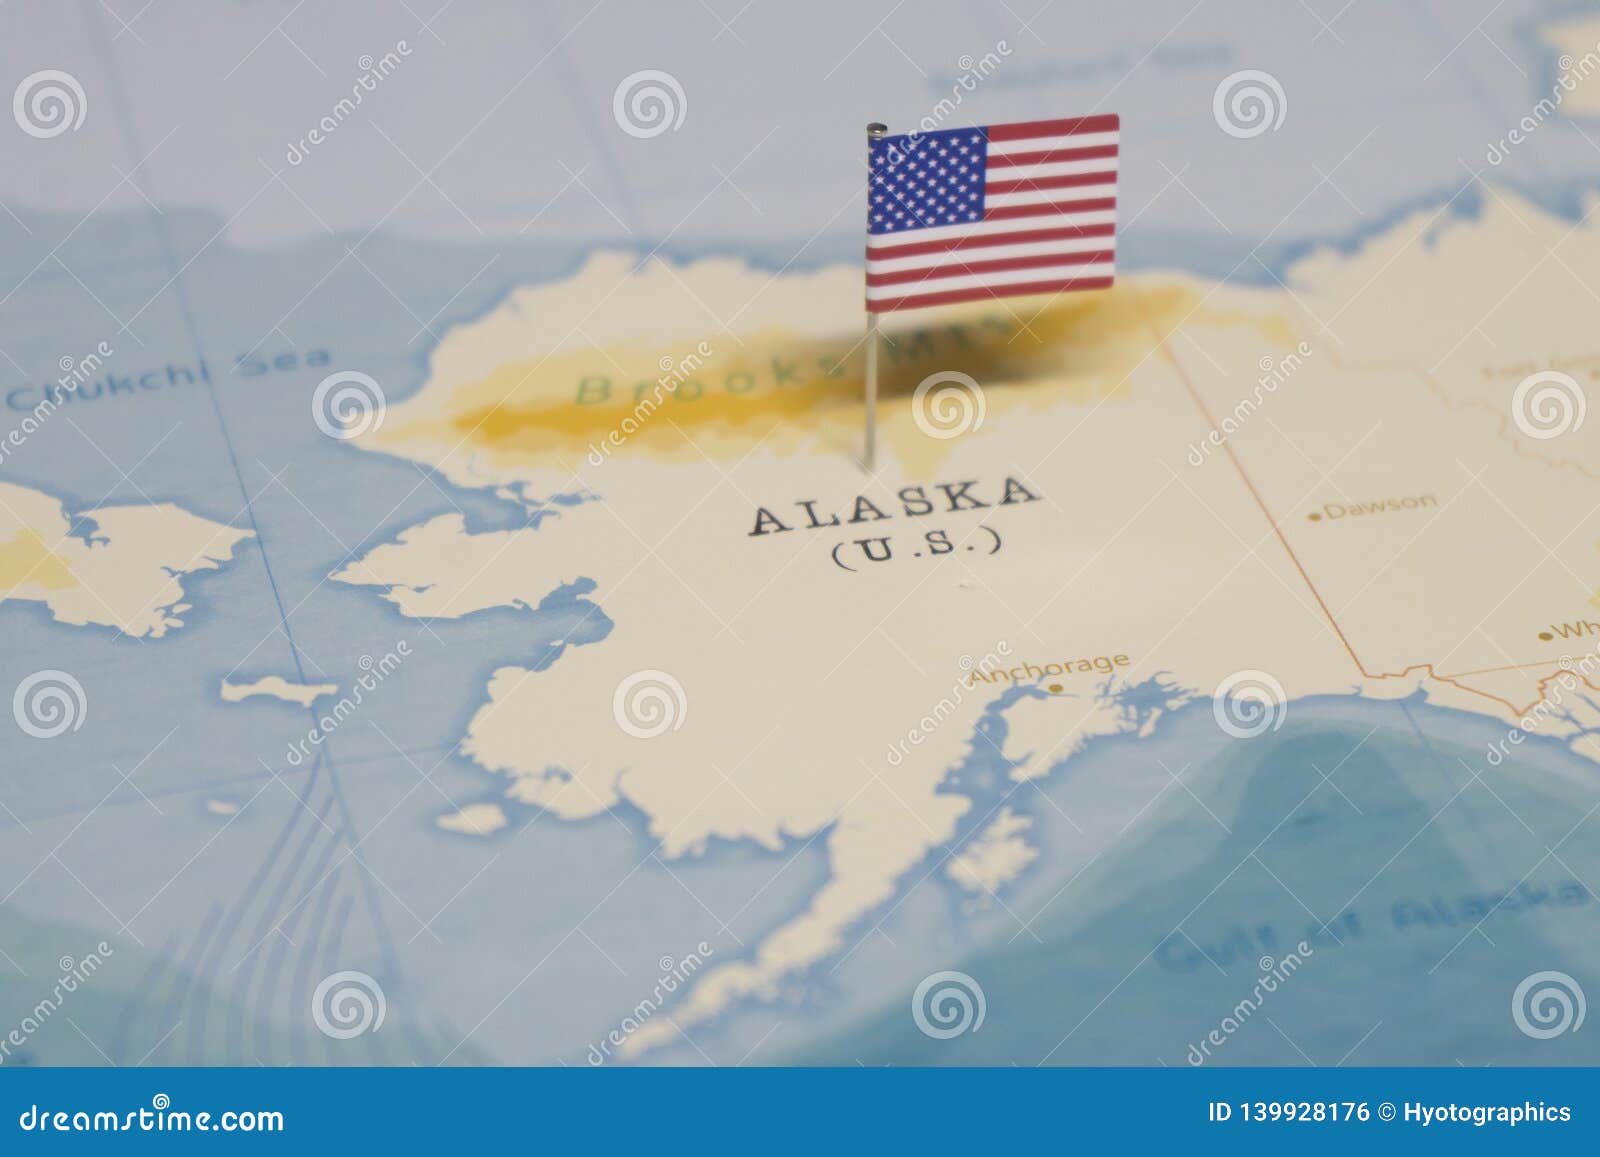 The Flag Of The United States On The Alaska In The World Map Stock Photo -  Image Of Education, Journey: 139928176